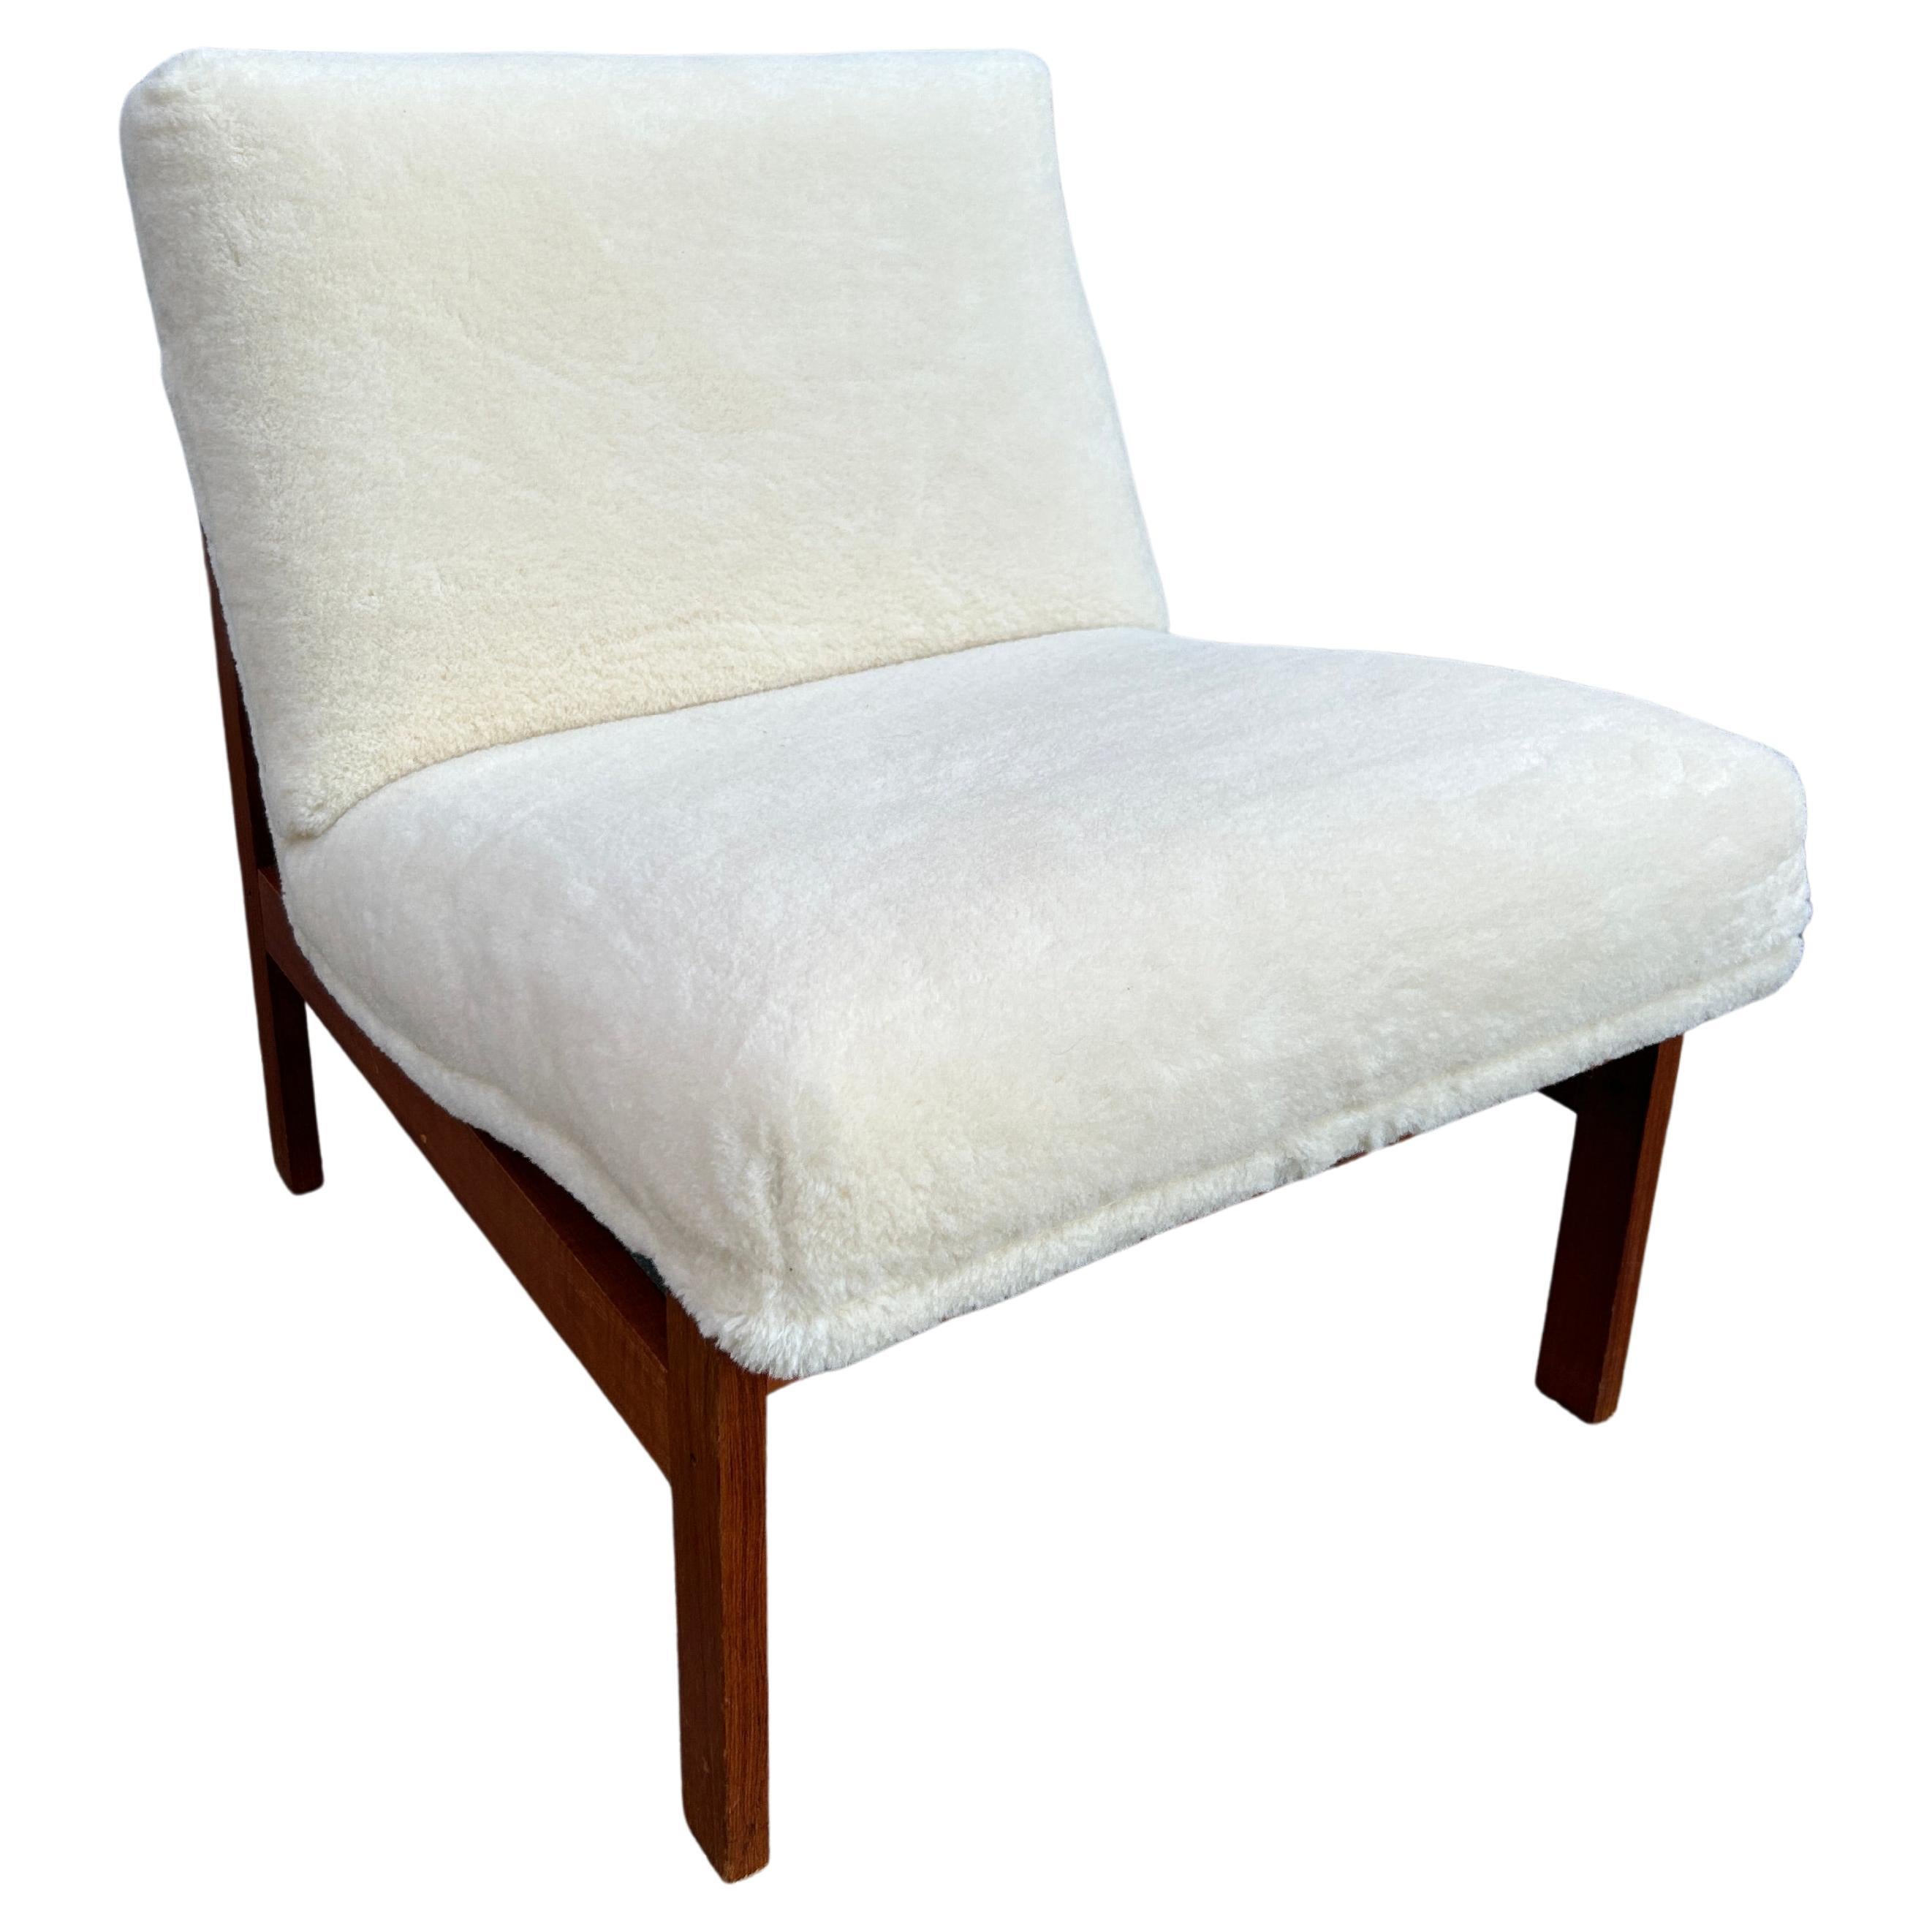 Beautiful minimalist Scandinavian Modern slipper lounge Chair by France & Son - Made in Denmark. Solid geometric teak frame with high quality joints with brand new Holly Hunt shearling wool upholstery in white. This chair was fully restored in Holly